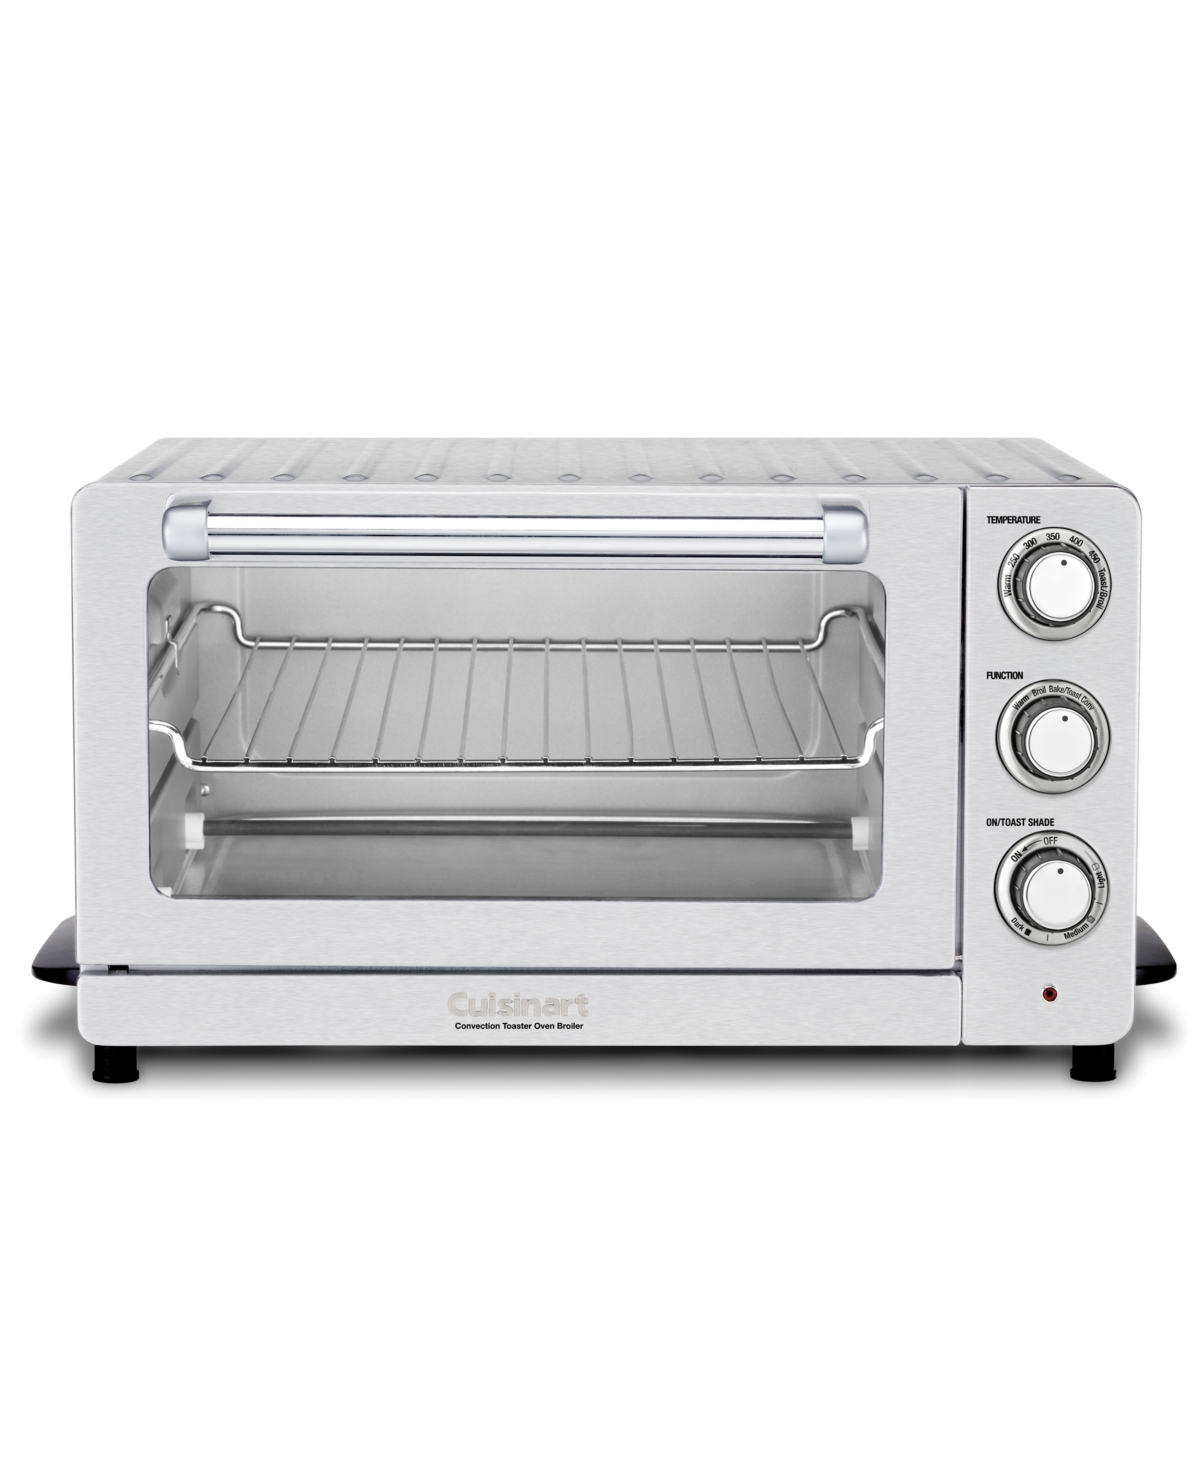 UPC 086279106629 product image for Cuisinart Tob-60N1 Toaster Oven, Broiler & Convection | upcitemdb.com